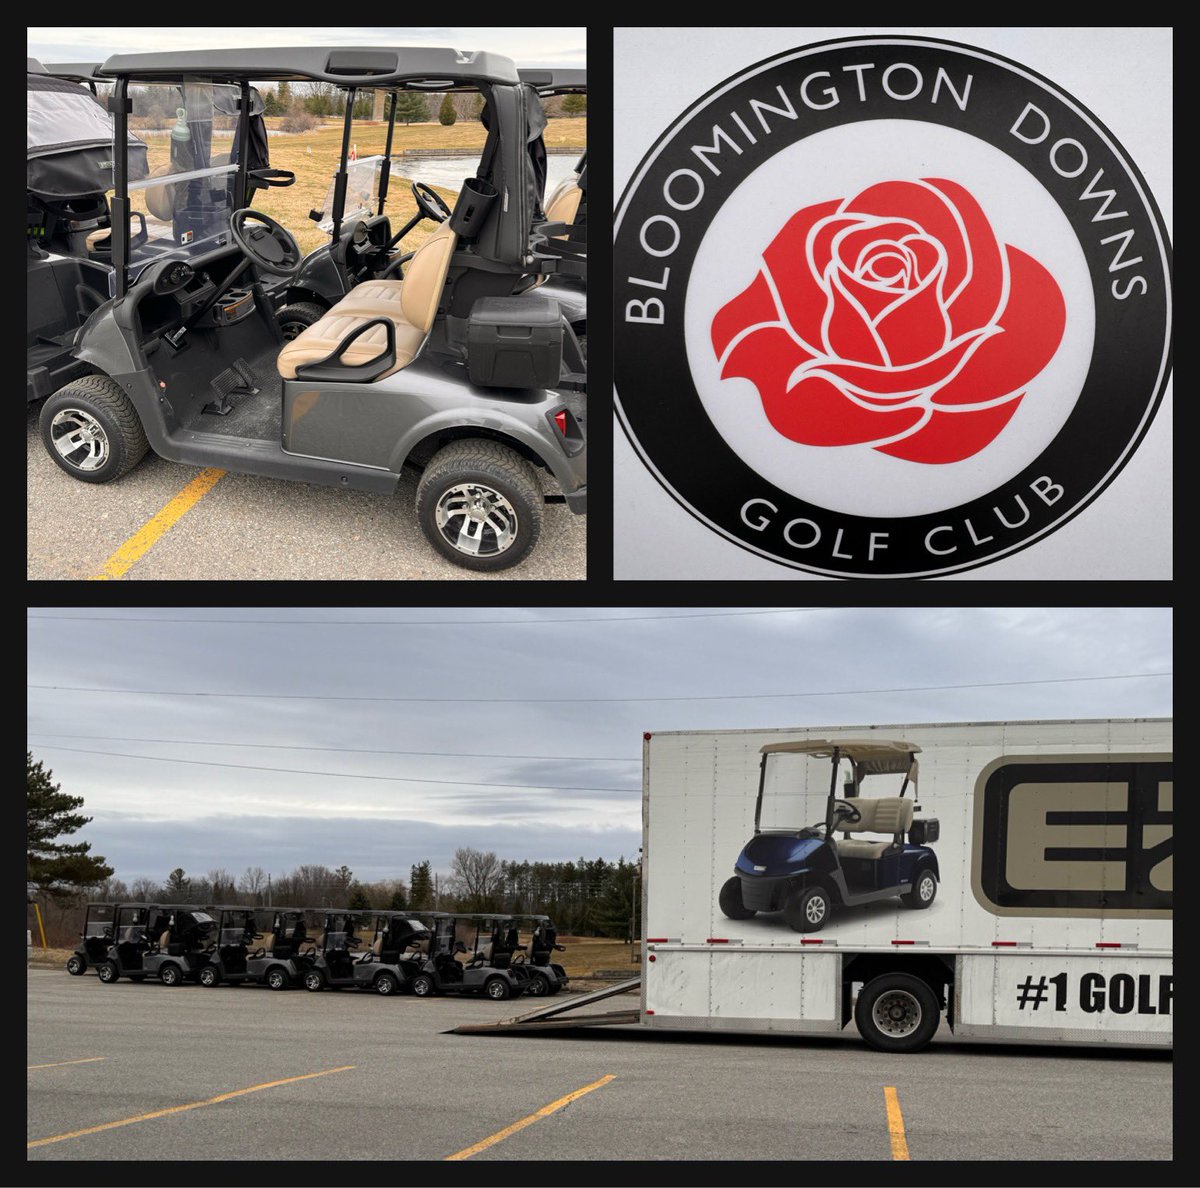 Trading in gas and going lithium! A “new to you” fleet of @EZGOvehicles RXV ELiTE being dropped today by @gc_duke to #Bloomingtondowns looking pretty fancy! Enjoy the new fleet guys and thank you!